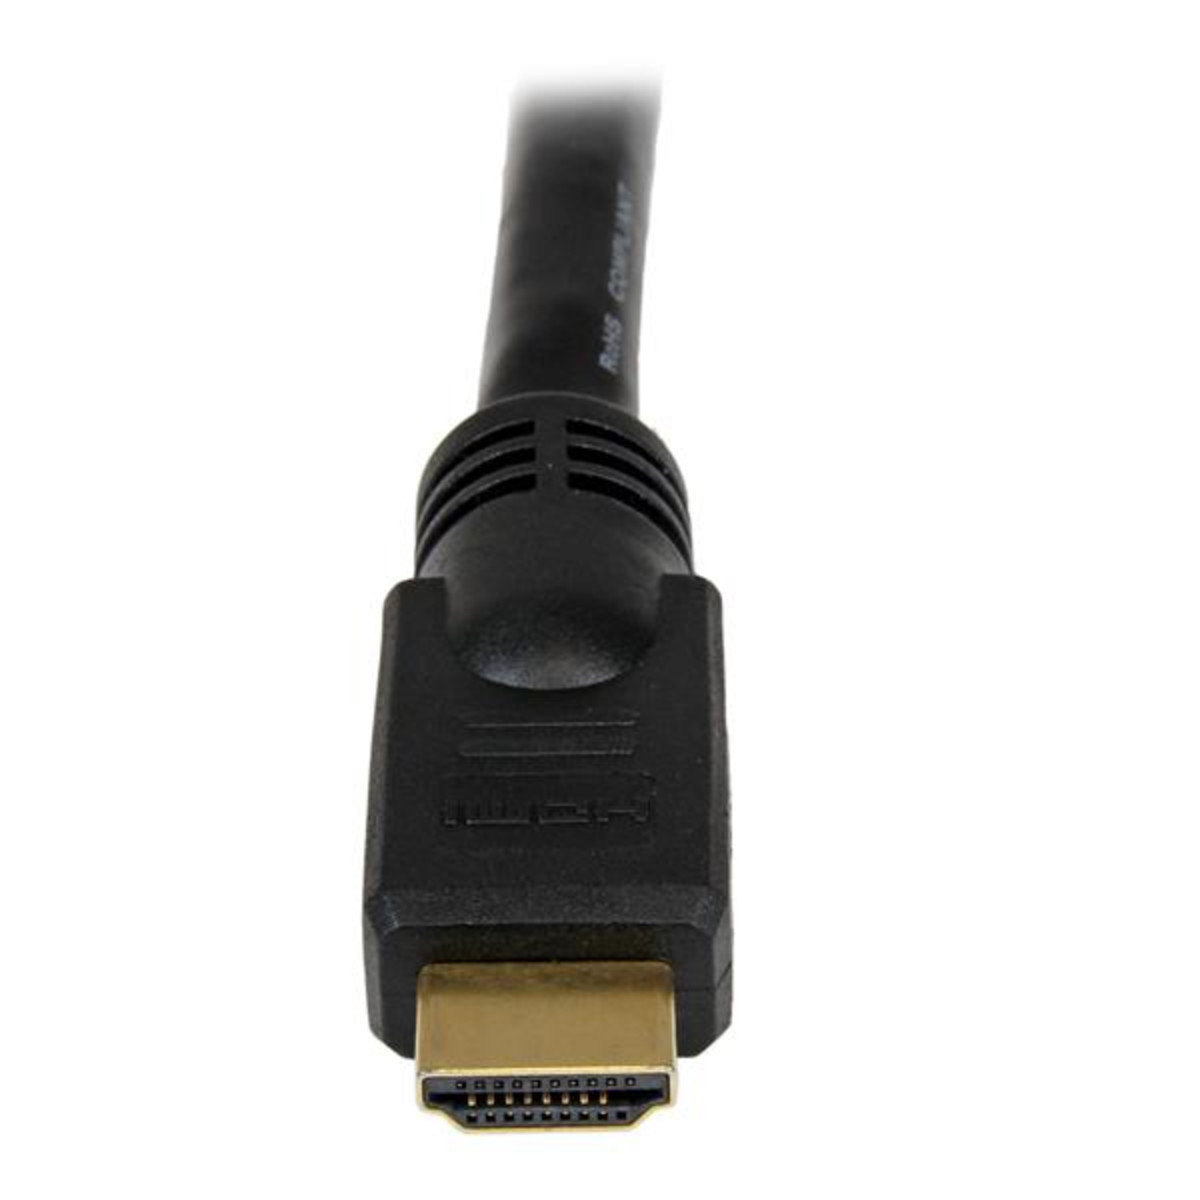 15m High Speed HDMI Cable